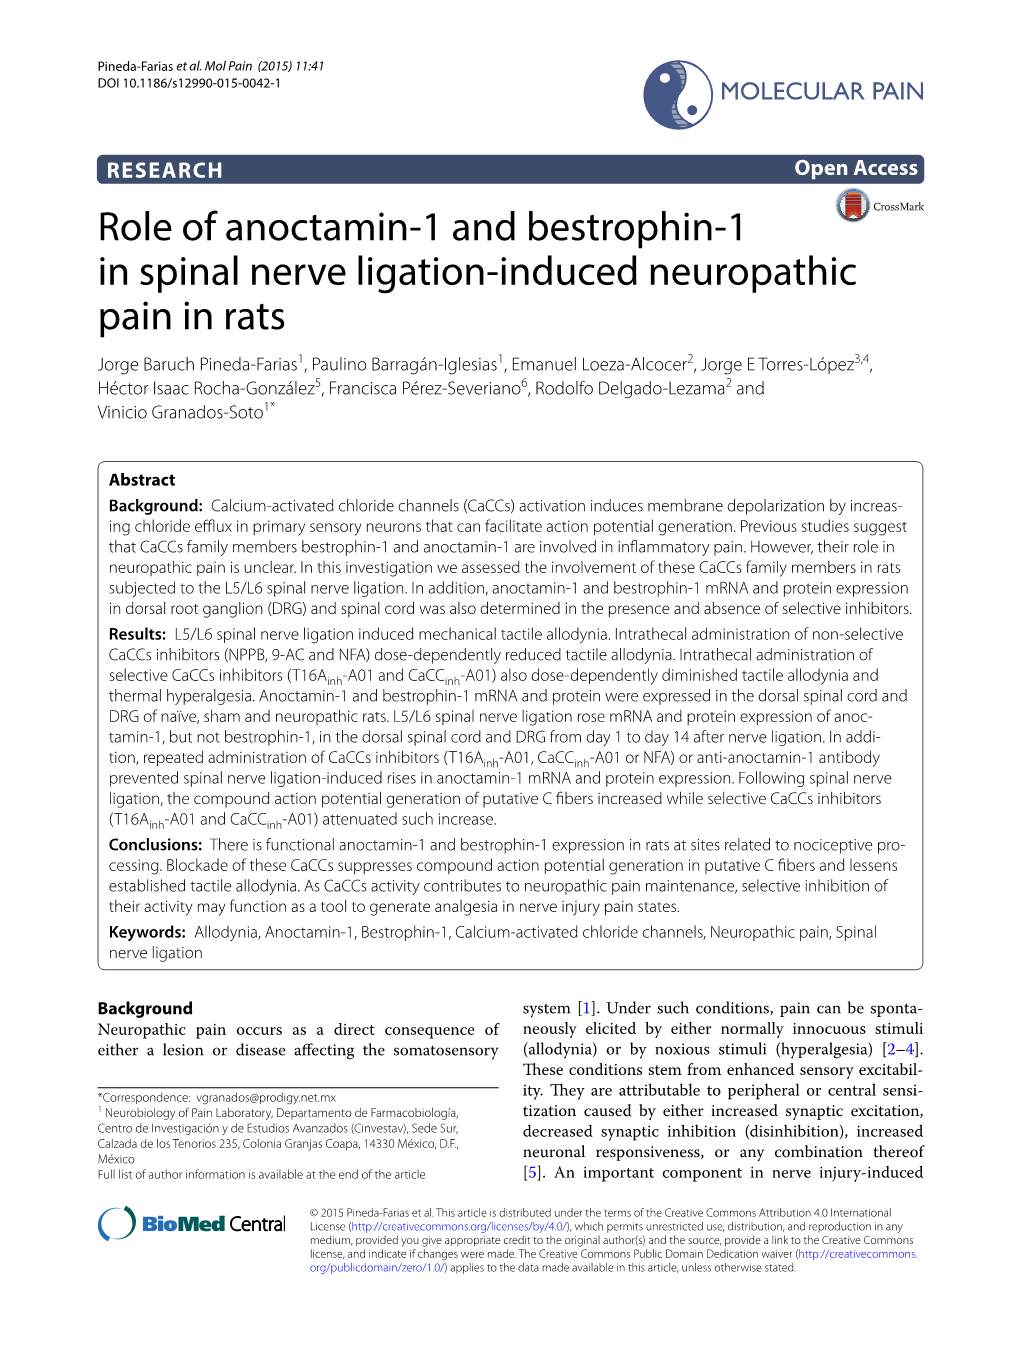 Role of Anoctamin-1 and Bestrophin-1 in Spinal Nerve Ligation-Induced